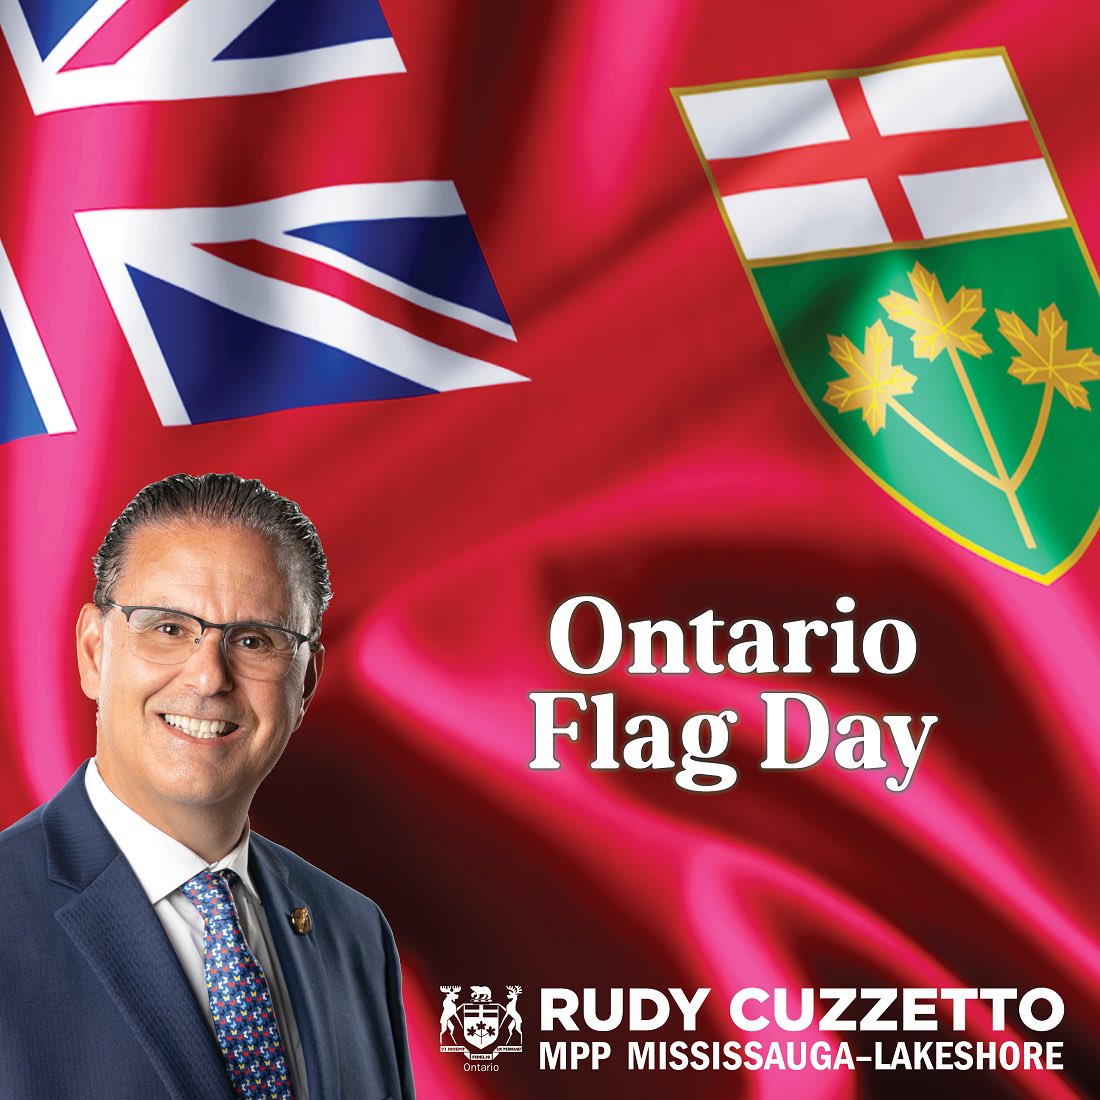 First recognized 59 years ago, on May 21st, 1965, the flag of Ontario represents our rich history, diverse heritage, and our shared values, including support for freedom, democracy, and human rights in our province and around the world. Happy Ontario Flag Day!